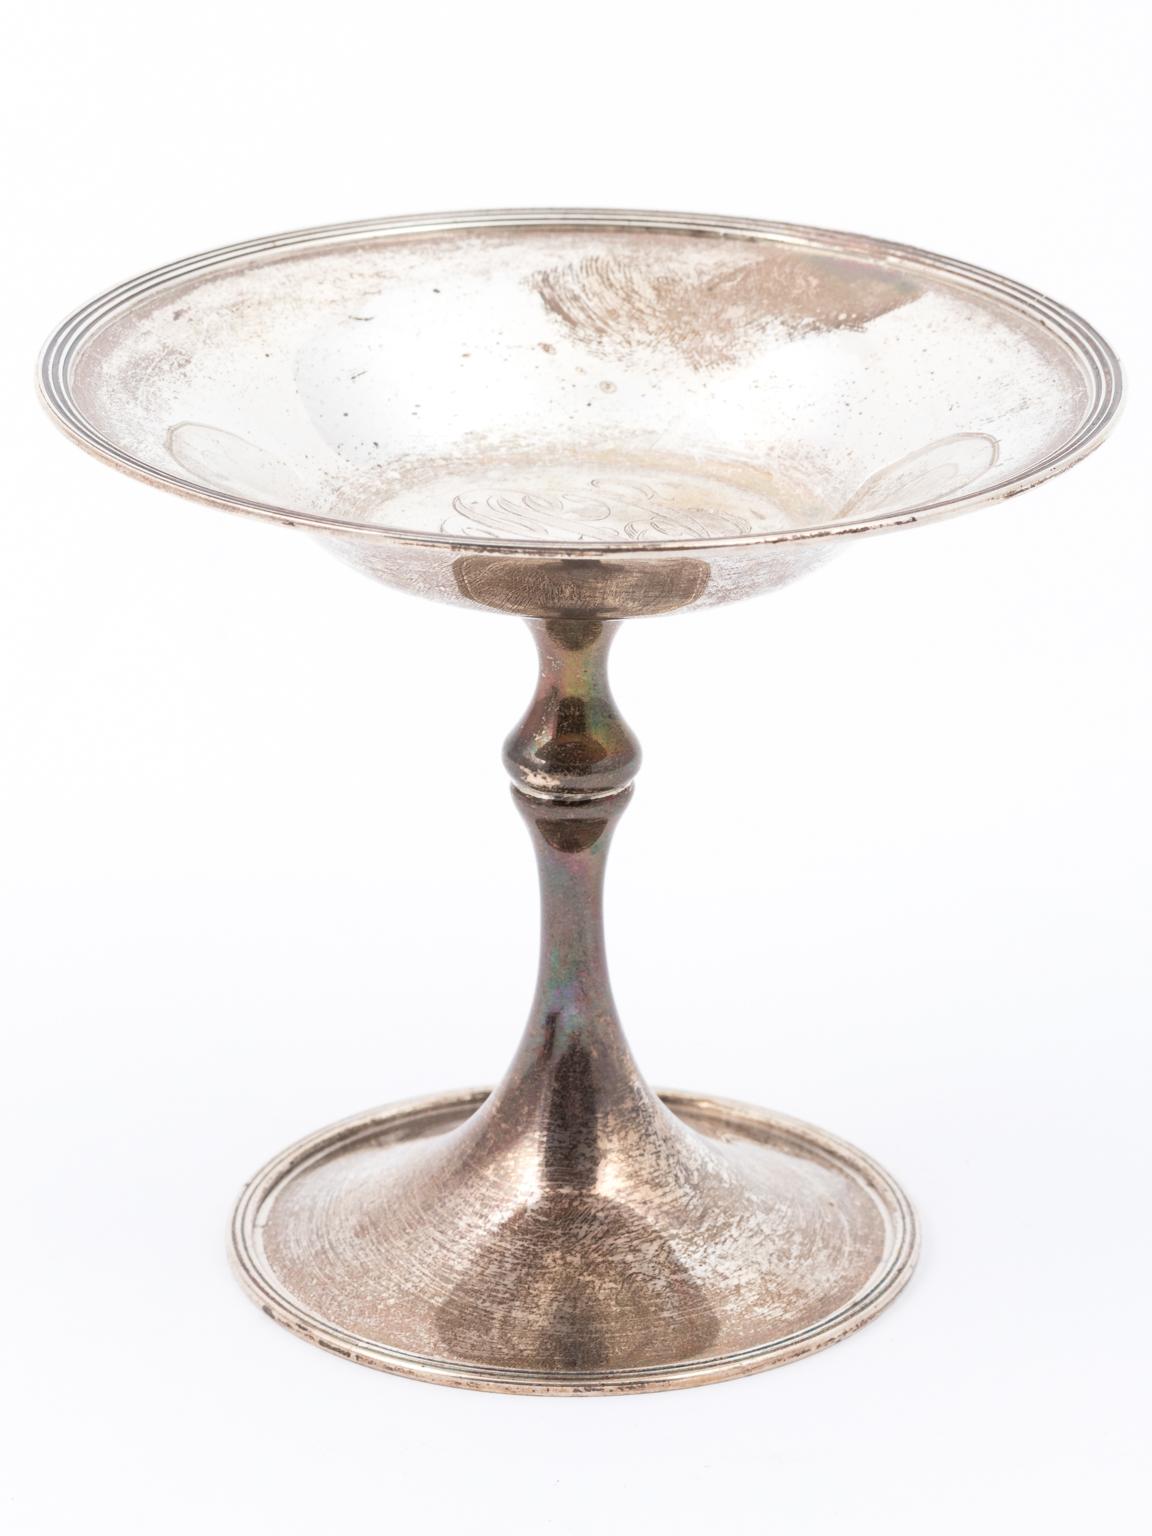 Etched Sterling Silver Compote, circa 1900s